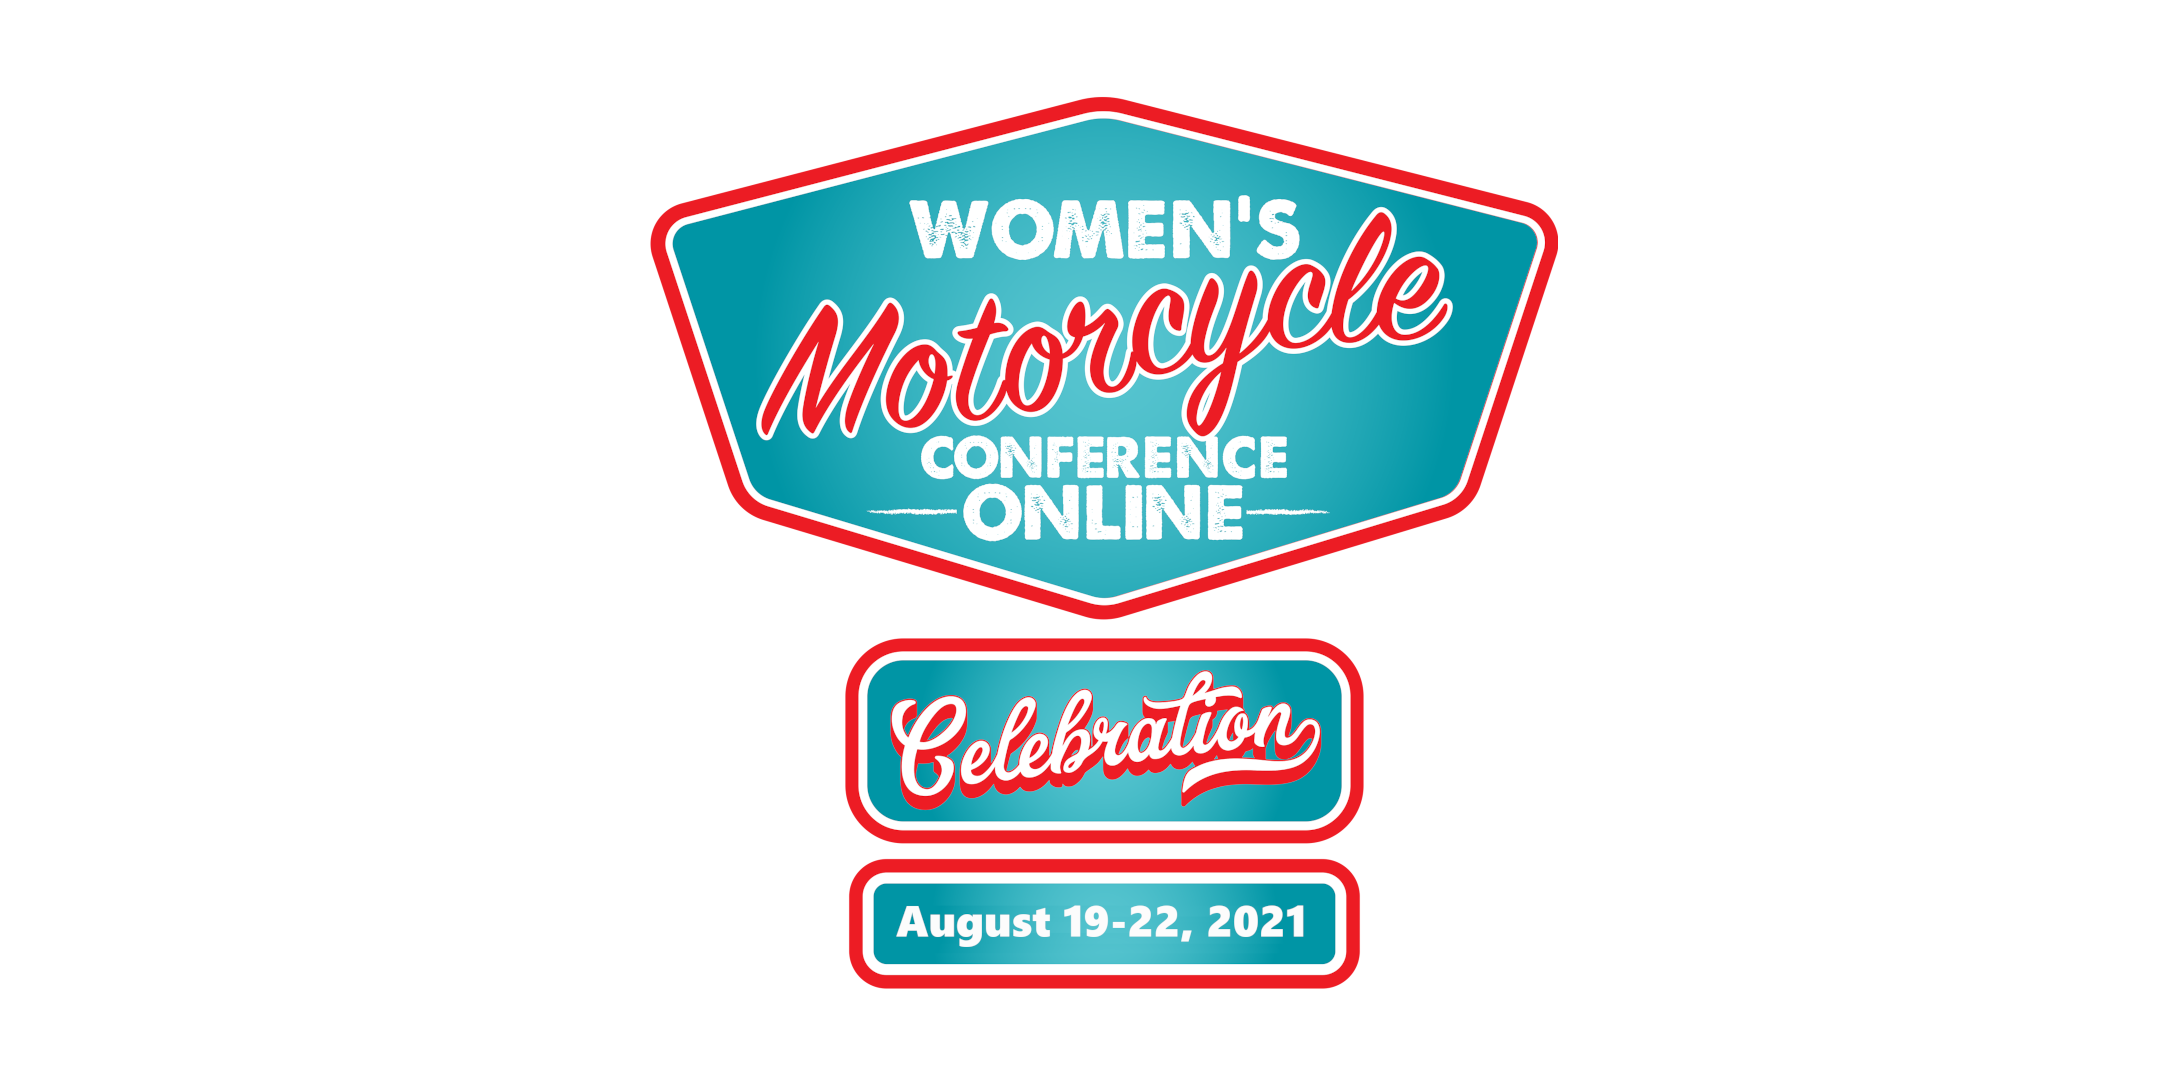 Women’s Motorcycle Festival and Conference Celebration